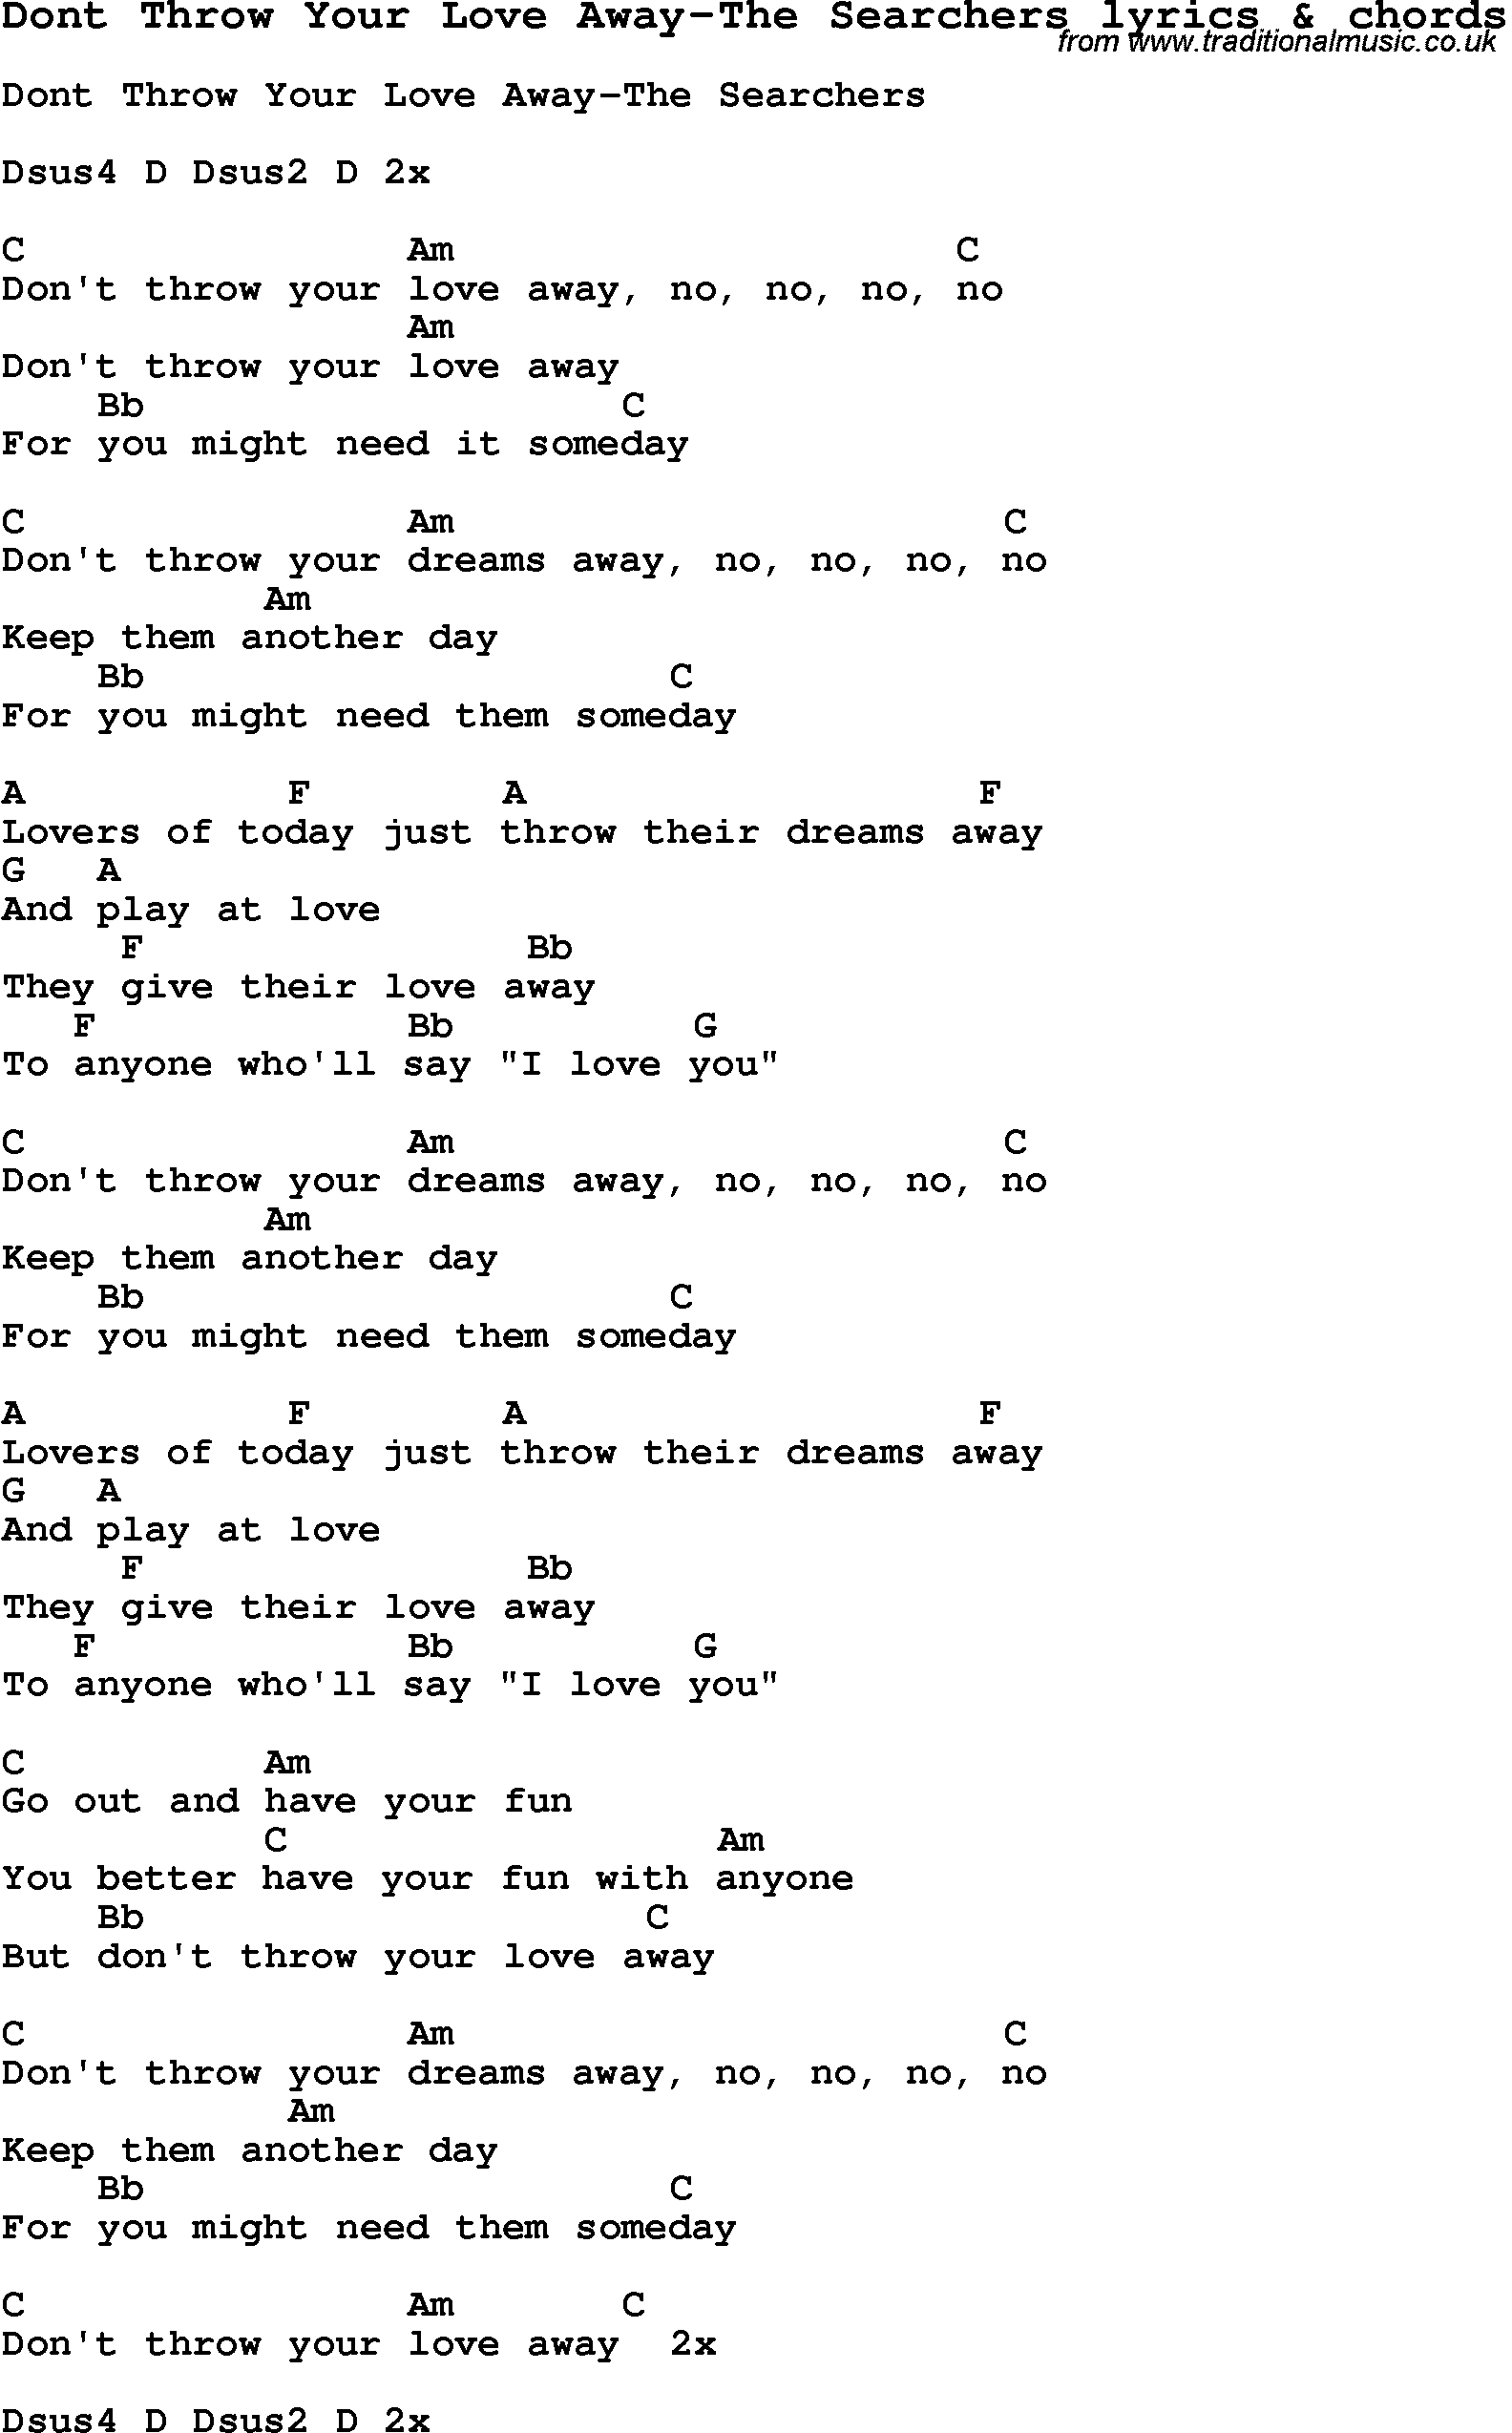 Love Song Lyrics for: Dont Throw Your Love Away-The Searchers with chords for Ukulele, Guitar Banjo etc.